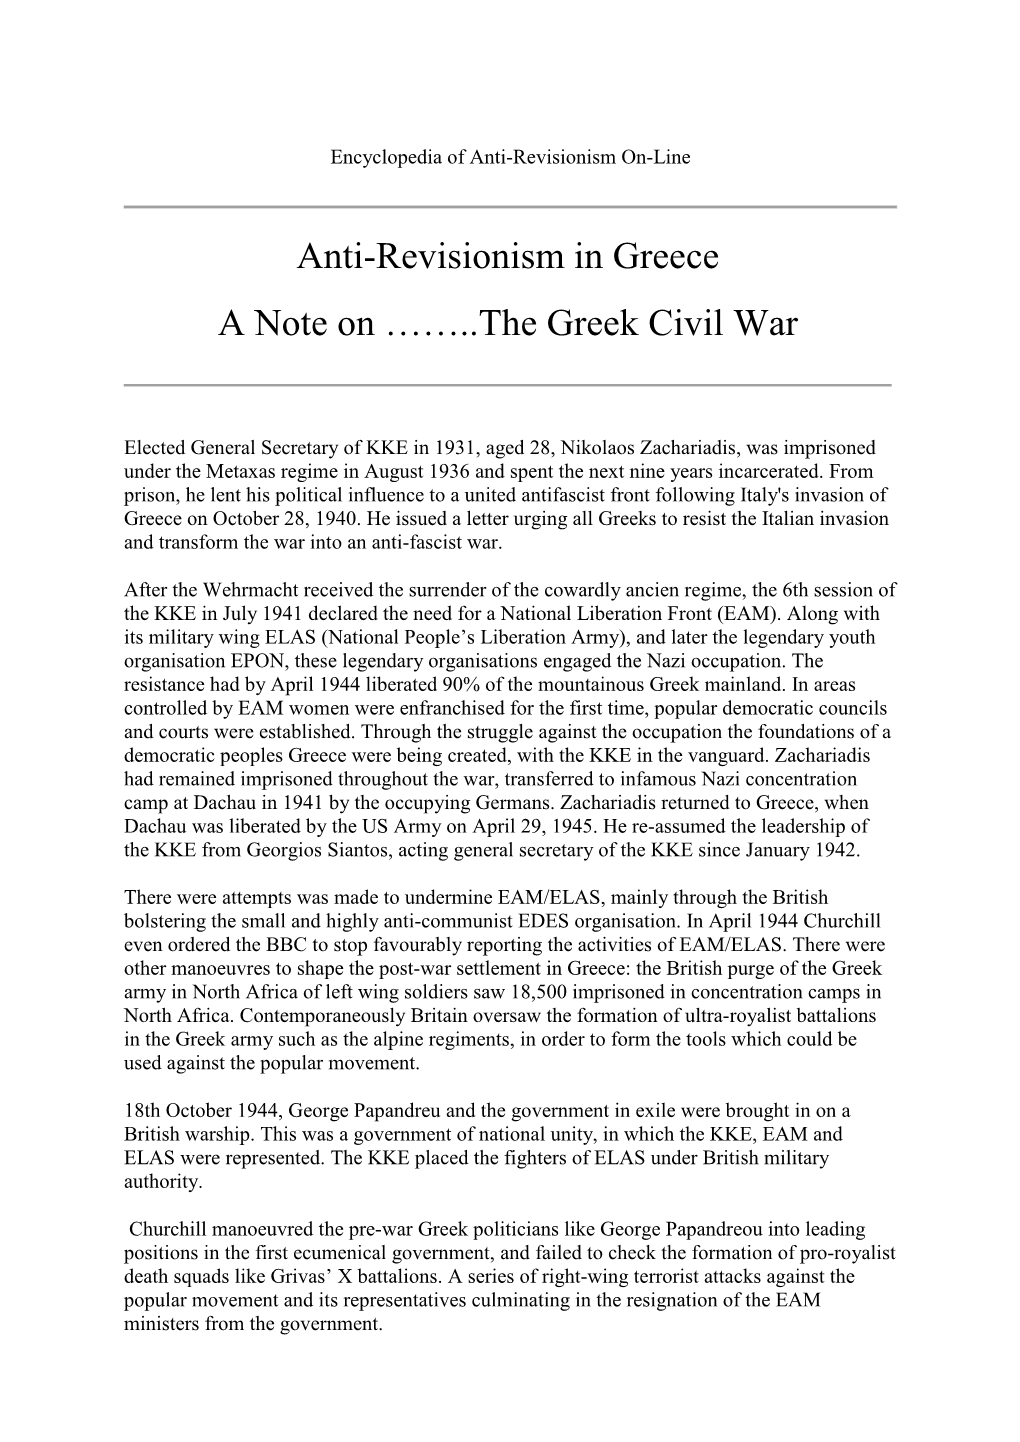 Anti-Revisionism in Greece a Note on ……..The Greek Civil War